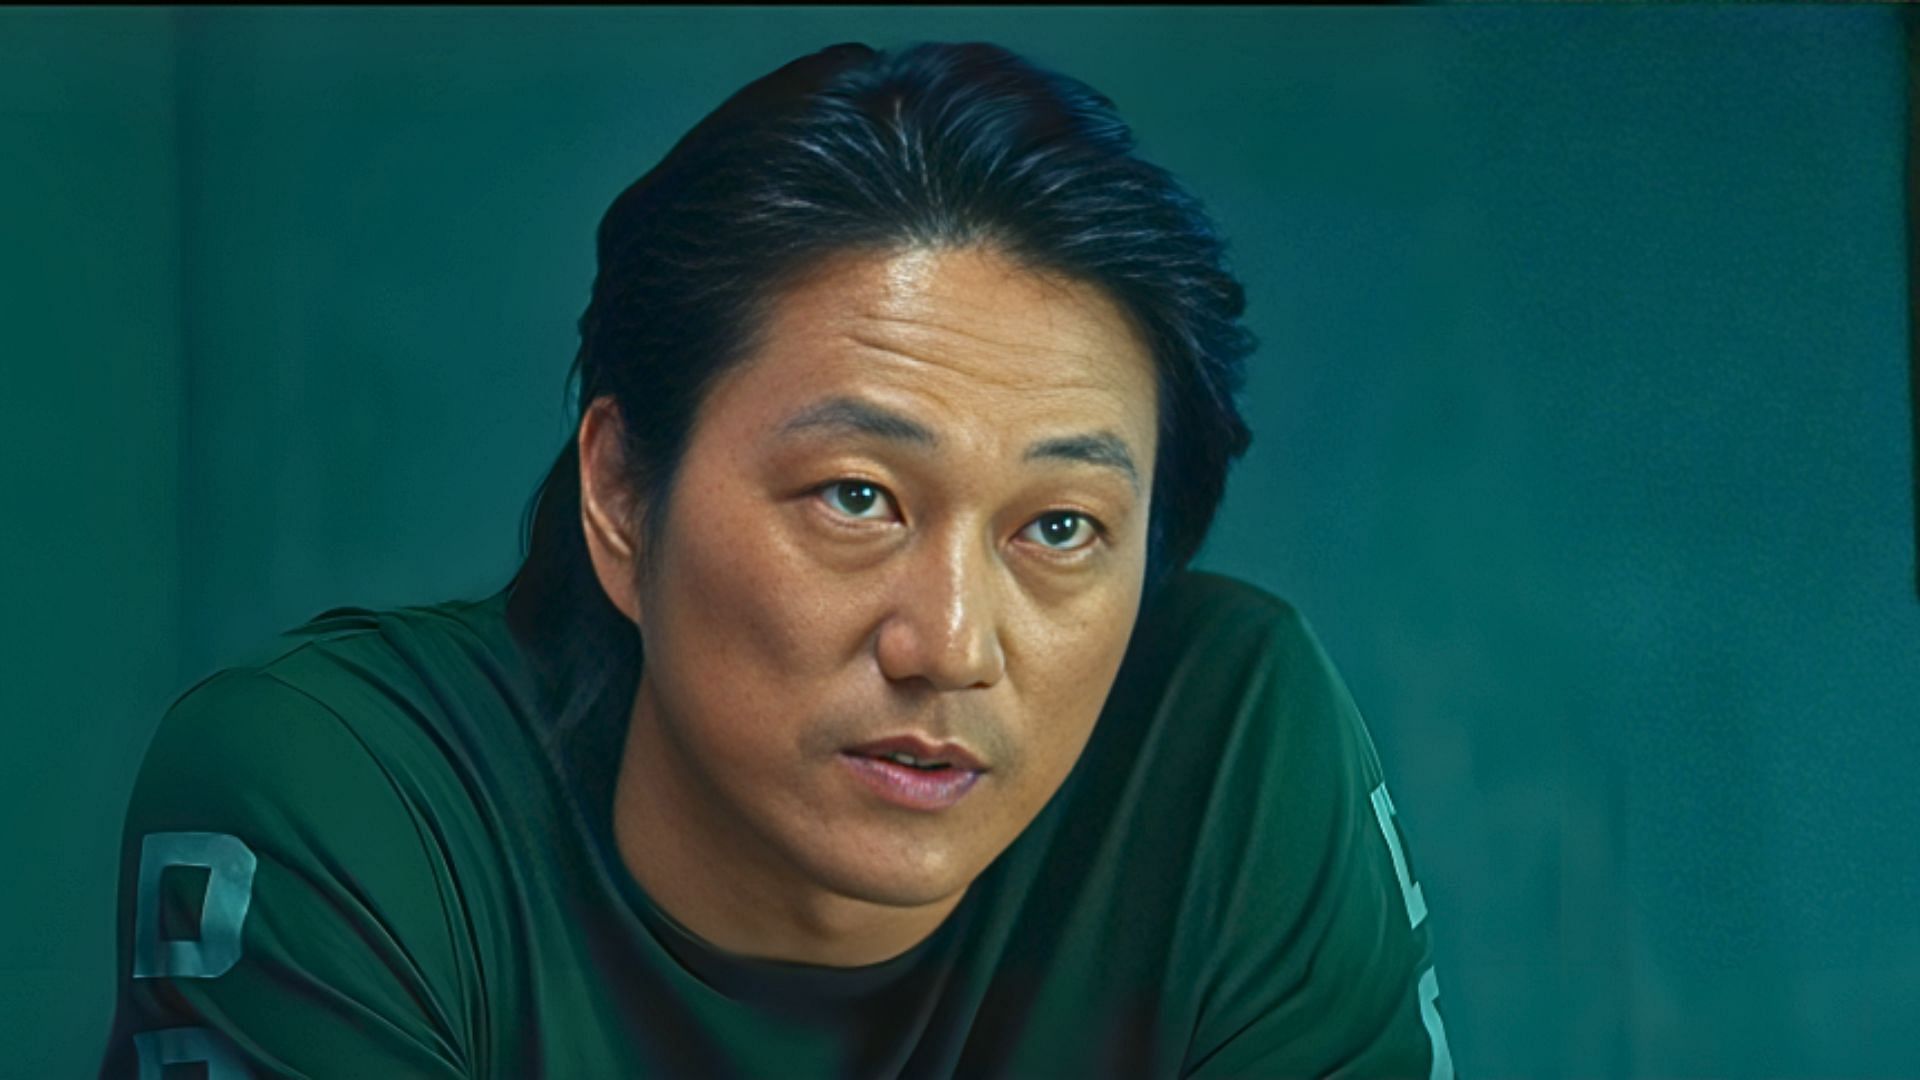 Actor Sung Kang played Officer Park in the movie Code 8 (Image via YouTube/Vertical, 1:26)